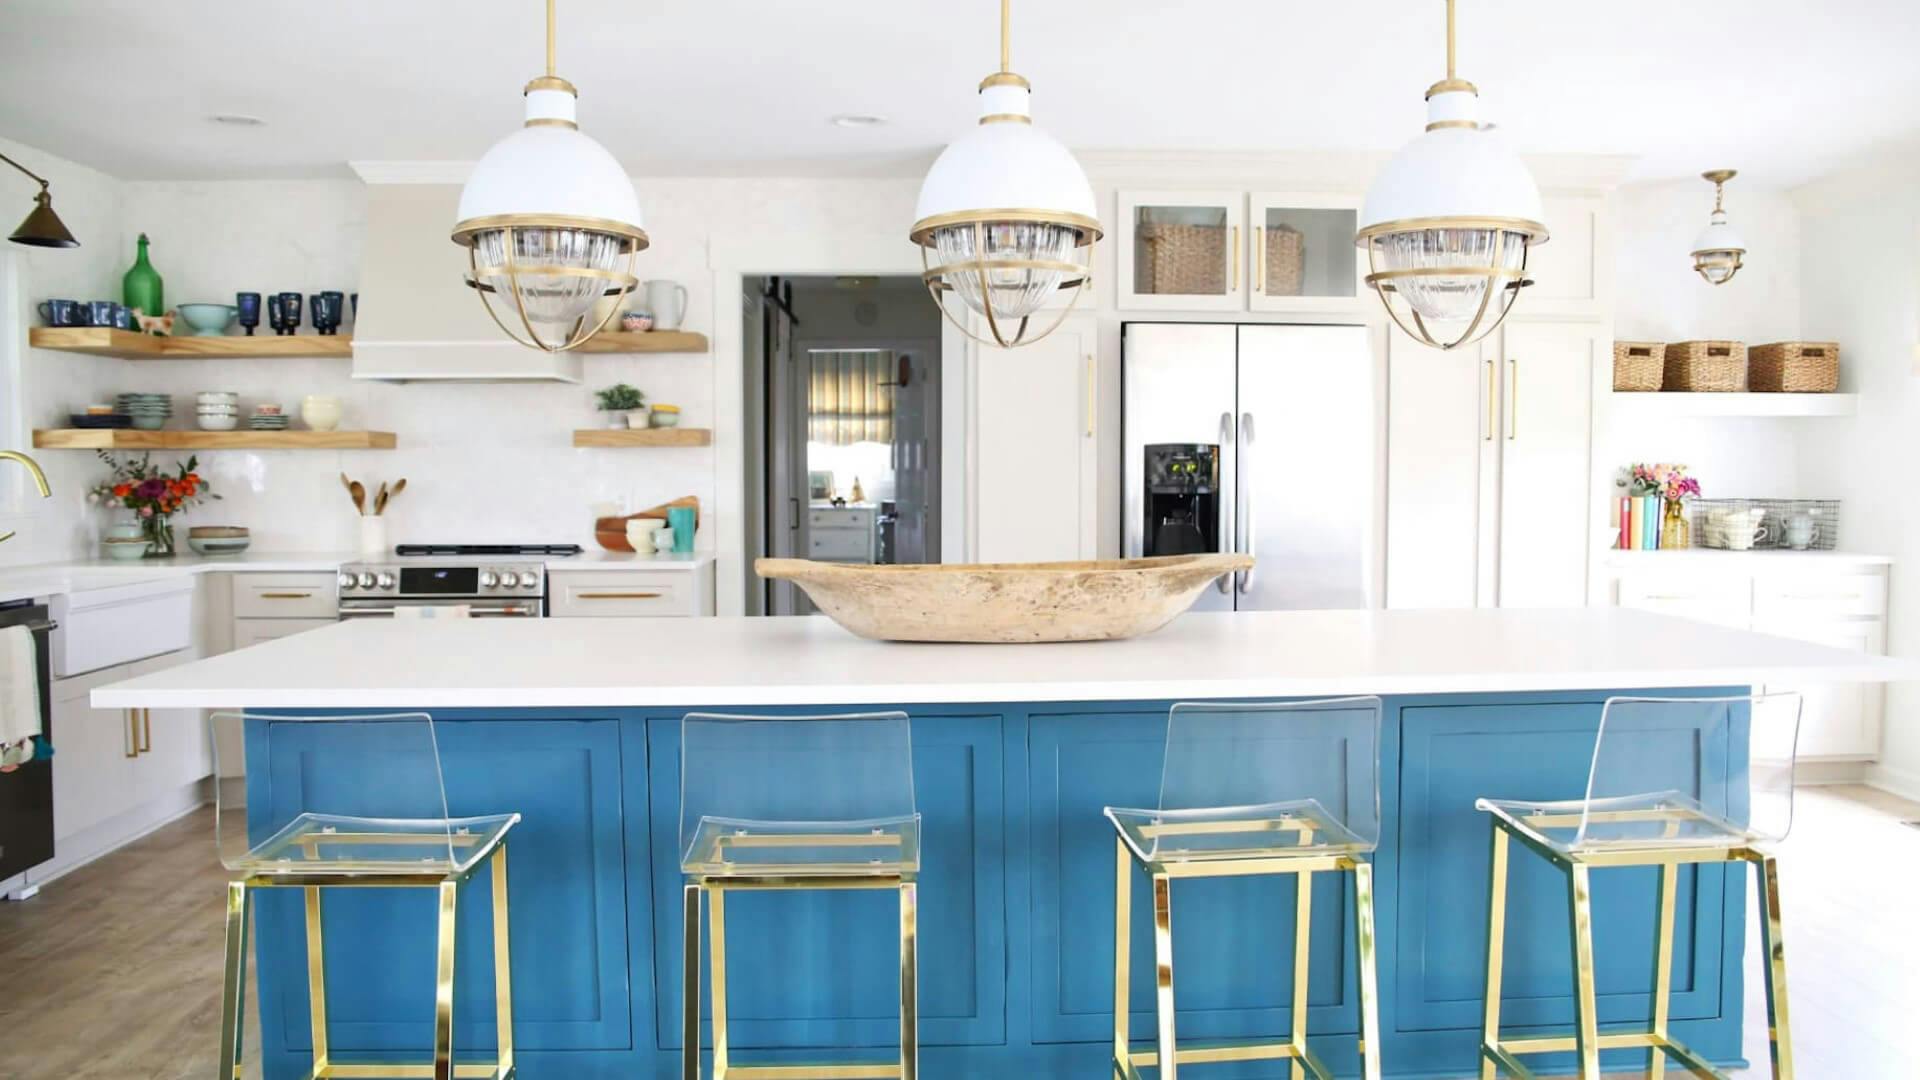 White kitchen with long blue kitchen island with three pendant lights in gold and white finish hanging above.